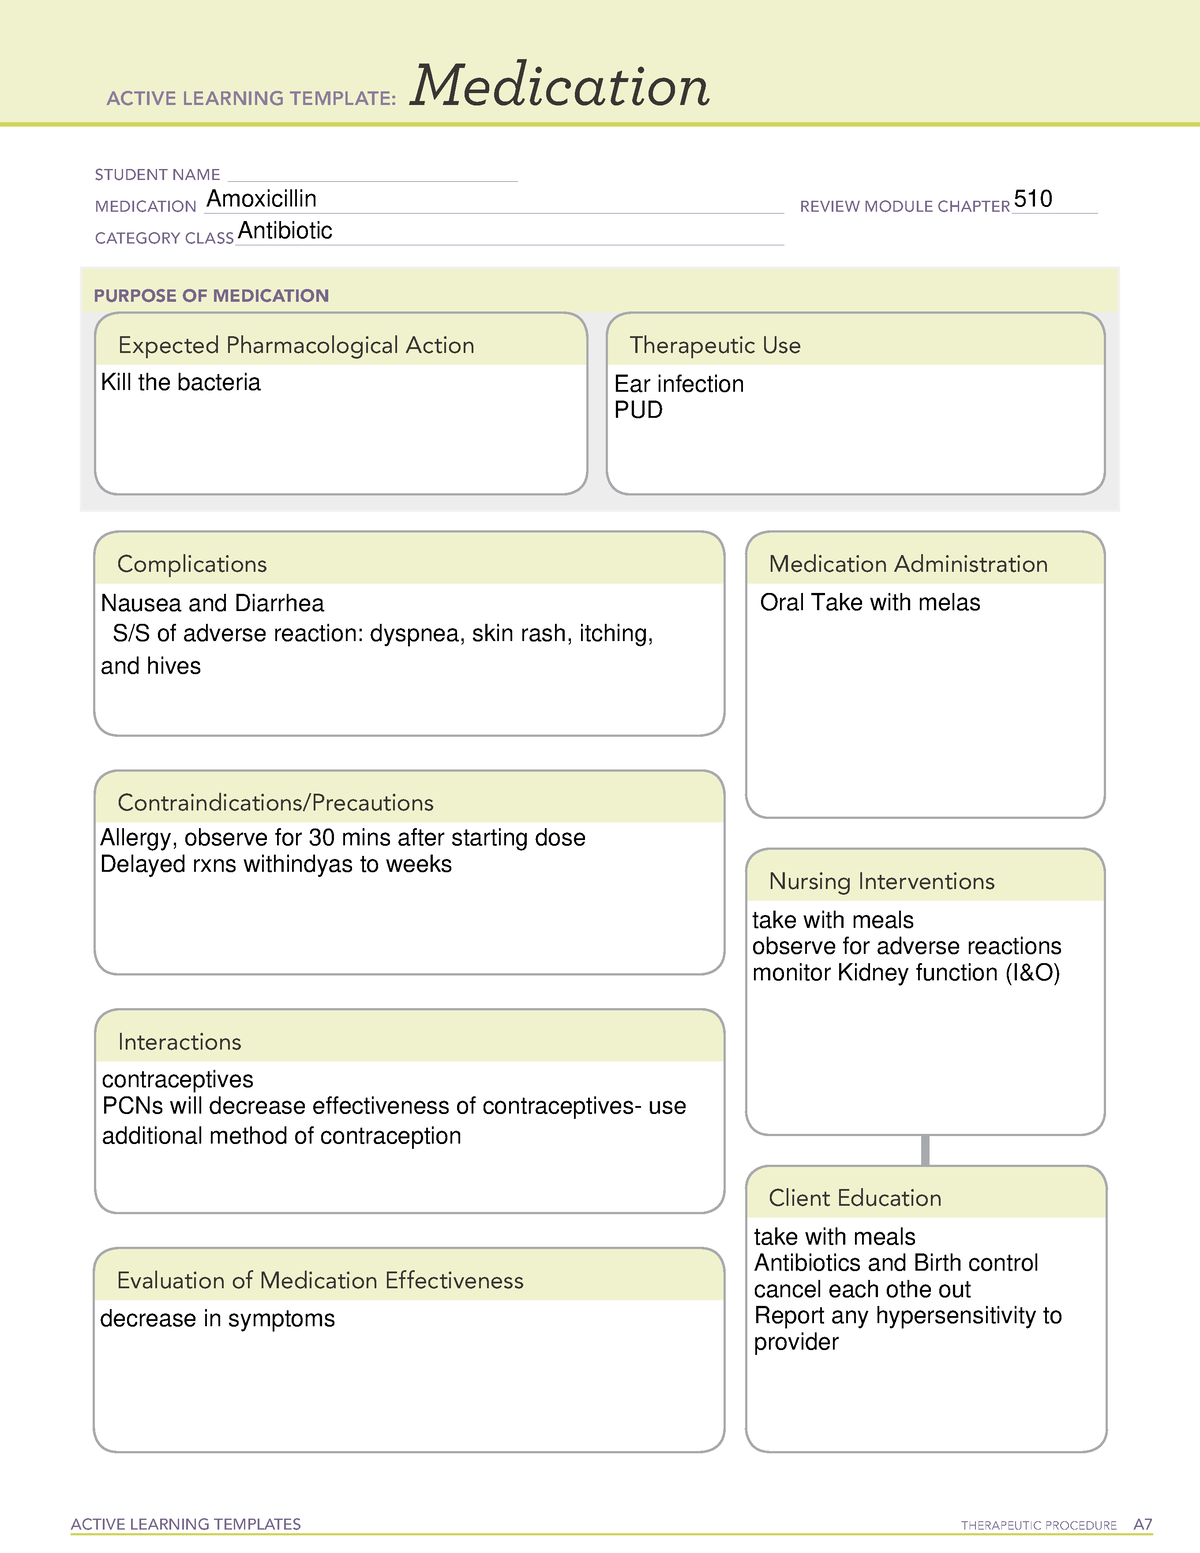 amoxicillin-medication-template-for-exam-active-learning-templates